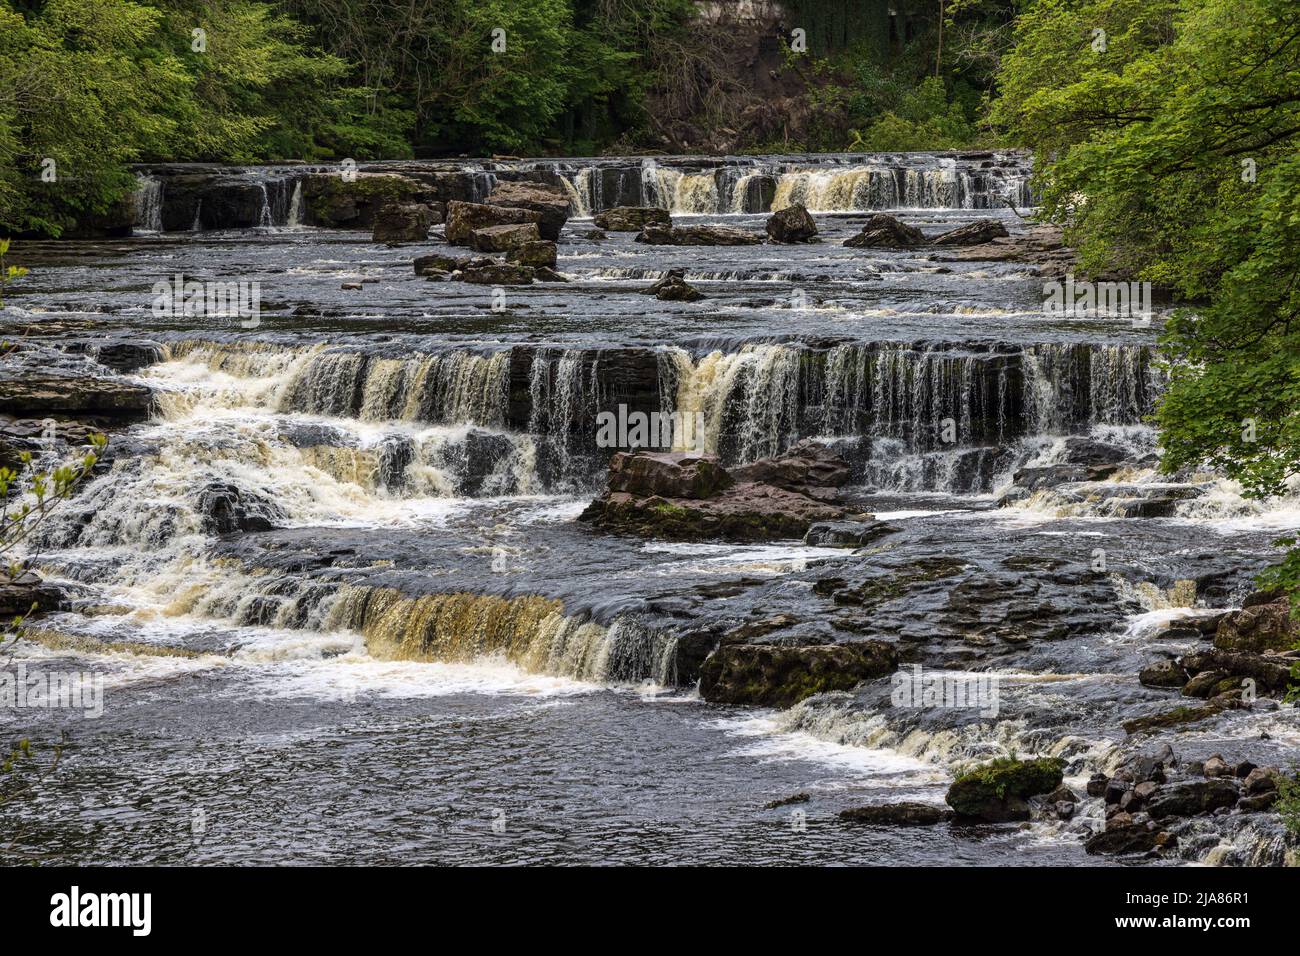 Aysgarth Upper Falls in the Yorkshire Dales National Park on the River Ure in Wensleydale, England, UK Stock Photo